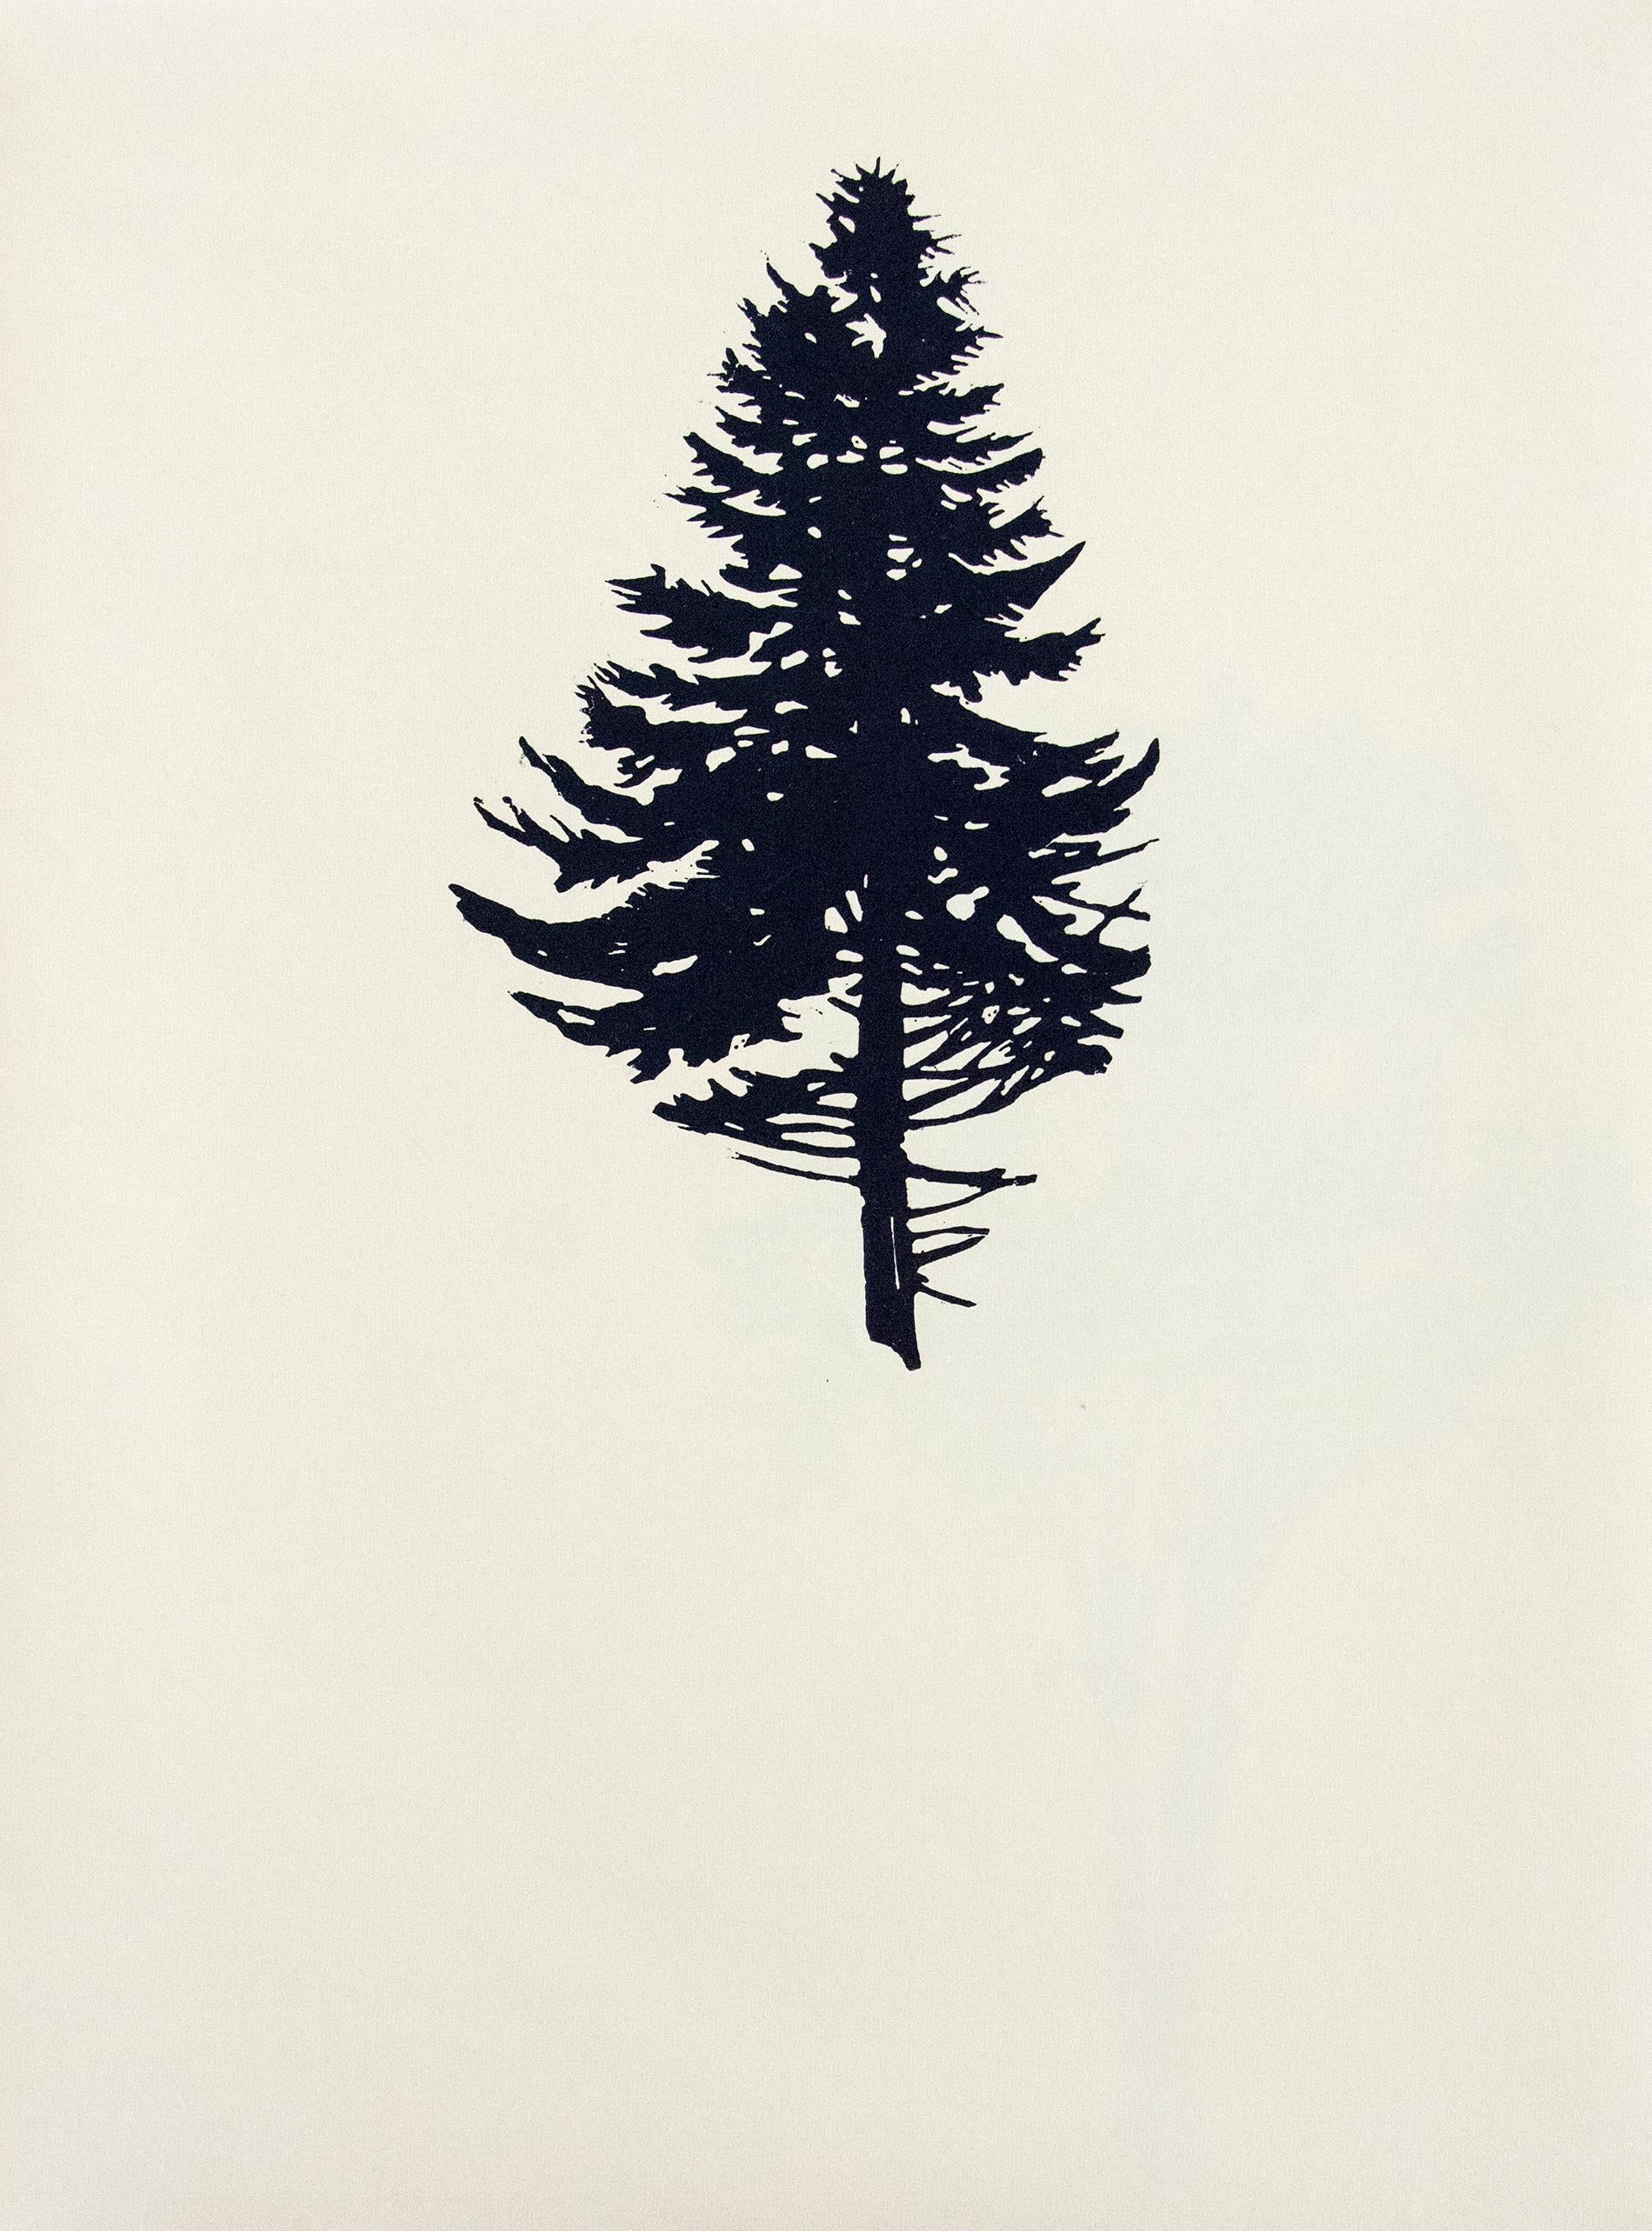 Der Wald or The Forest by Peter Hoffer consists of nine wood block prints in a single portfolio. In each of the nine images a single tree is printed cleanly in solid black on manila colored archival art paper. The trees -- tall, short, high or low